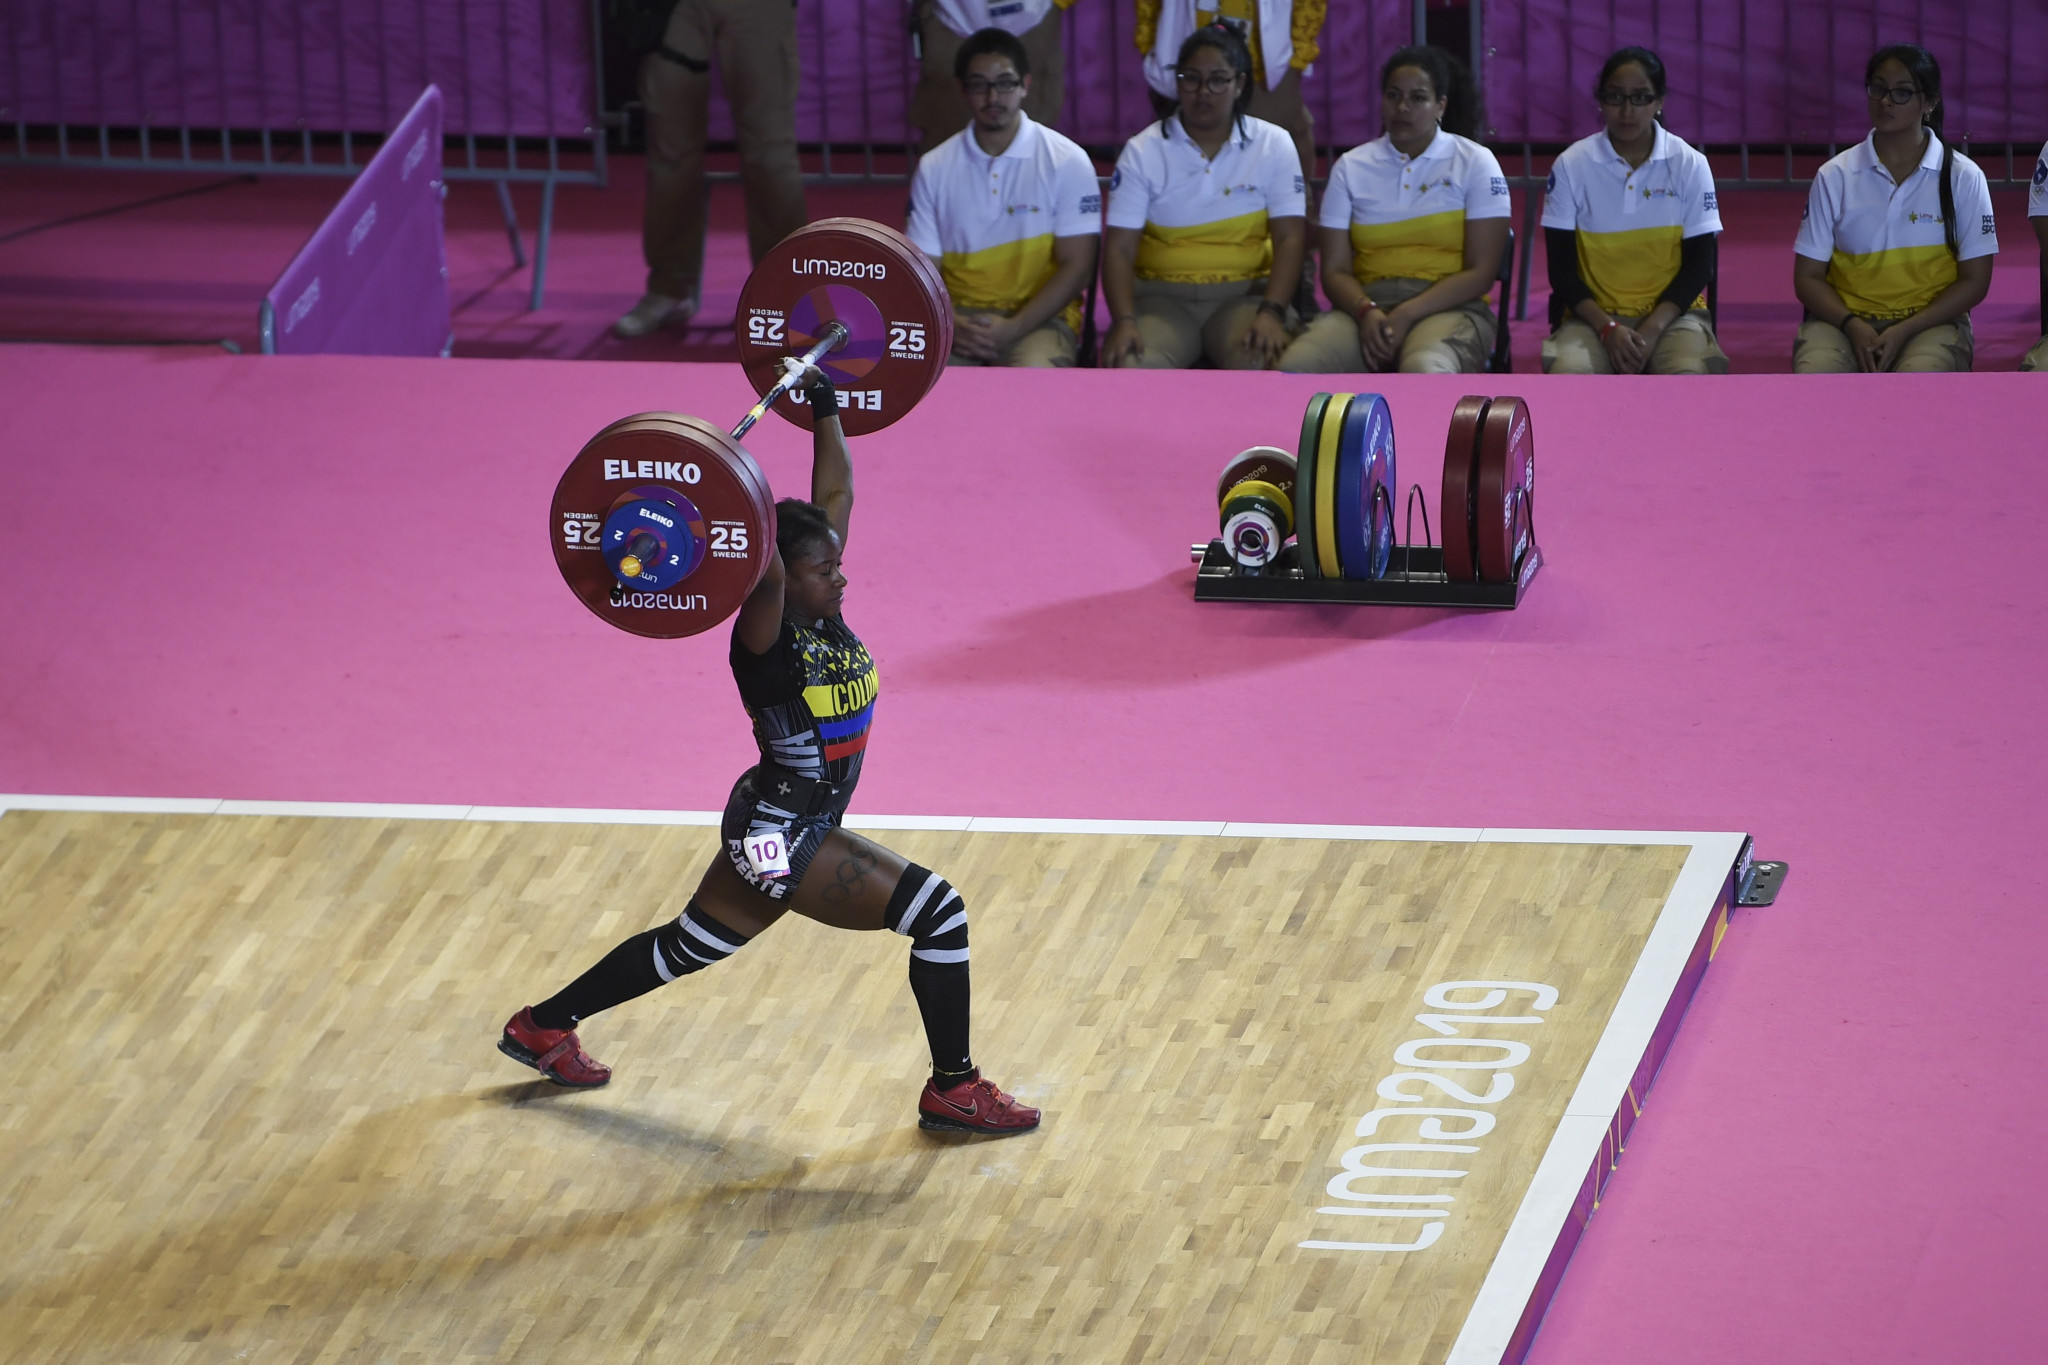 Lima had been due to host the IWF Youth World Championships this year ©Getty Images 